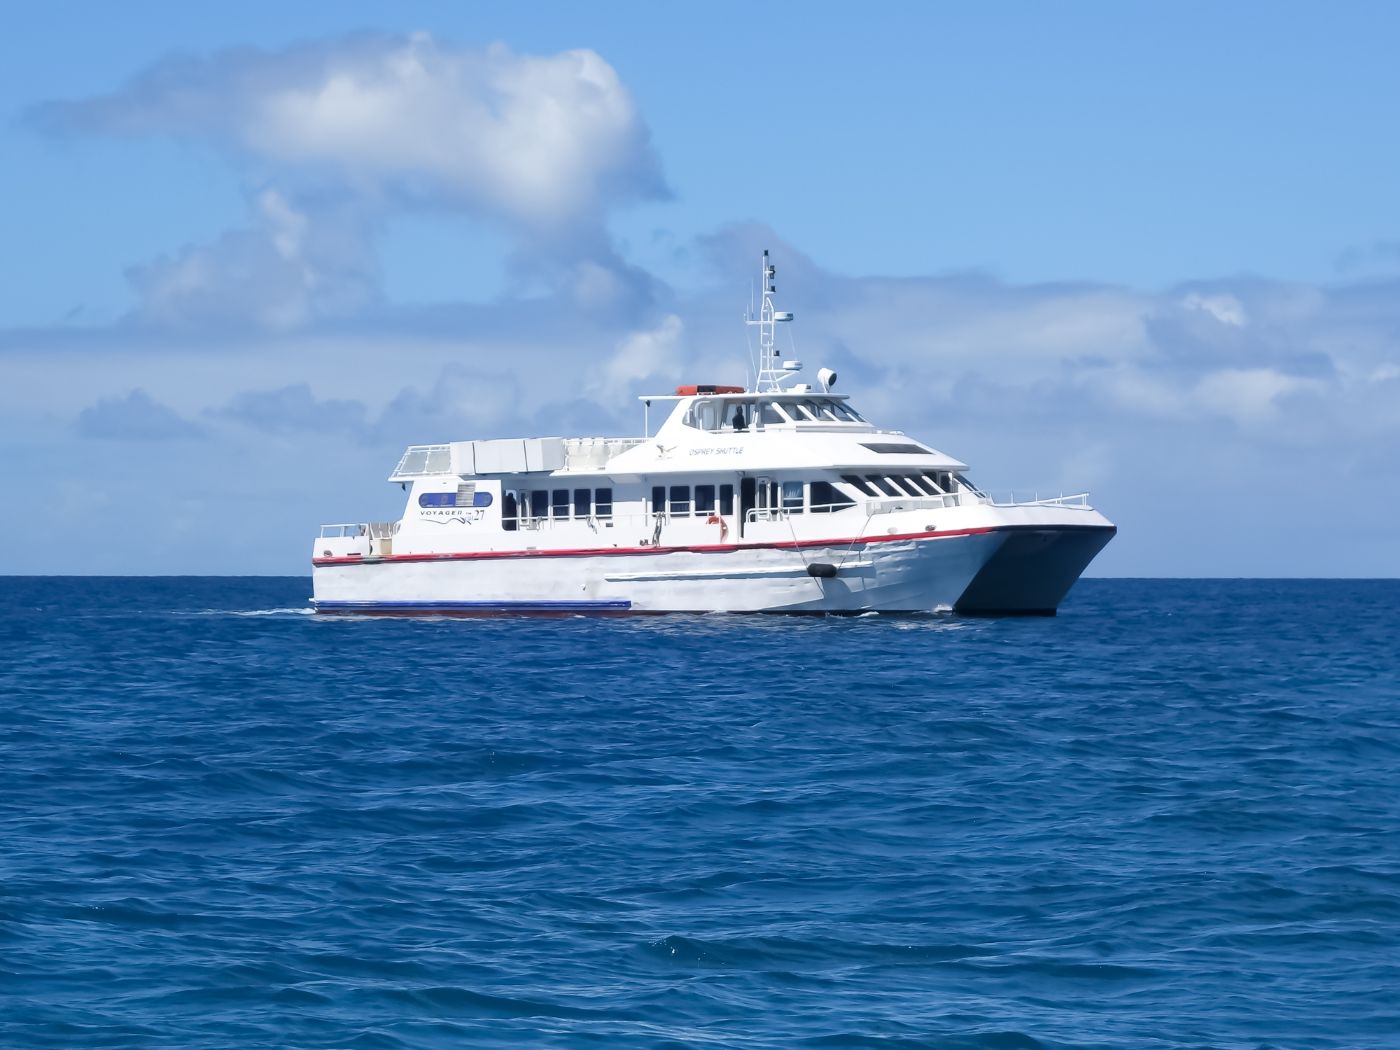 Travel to Carriacou on Osprey